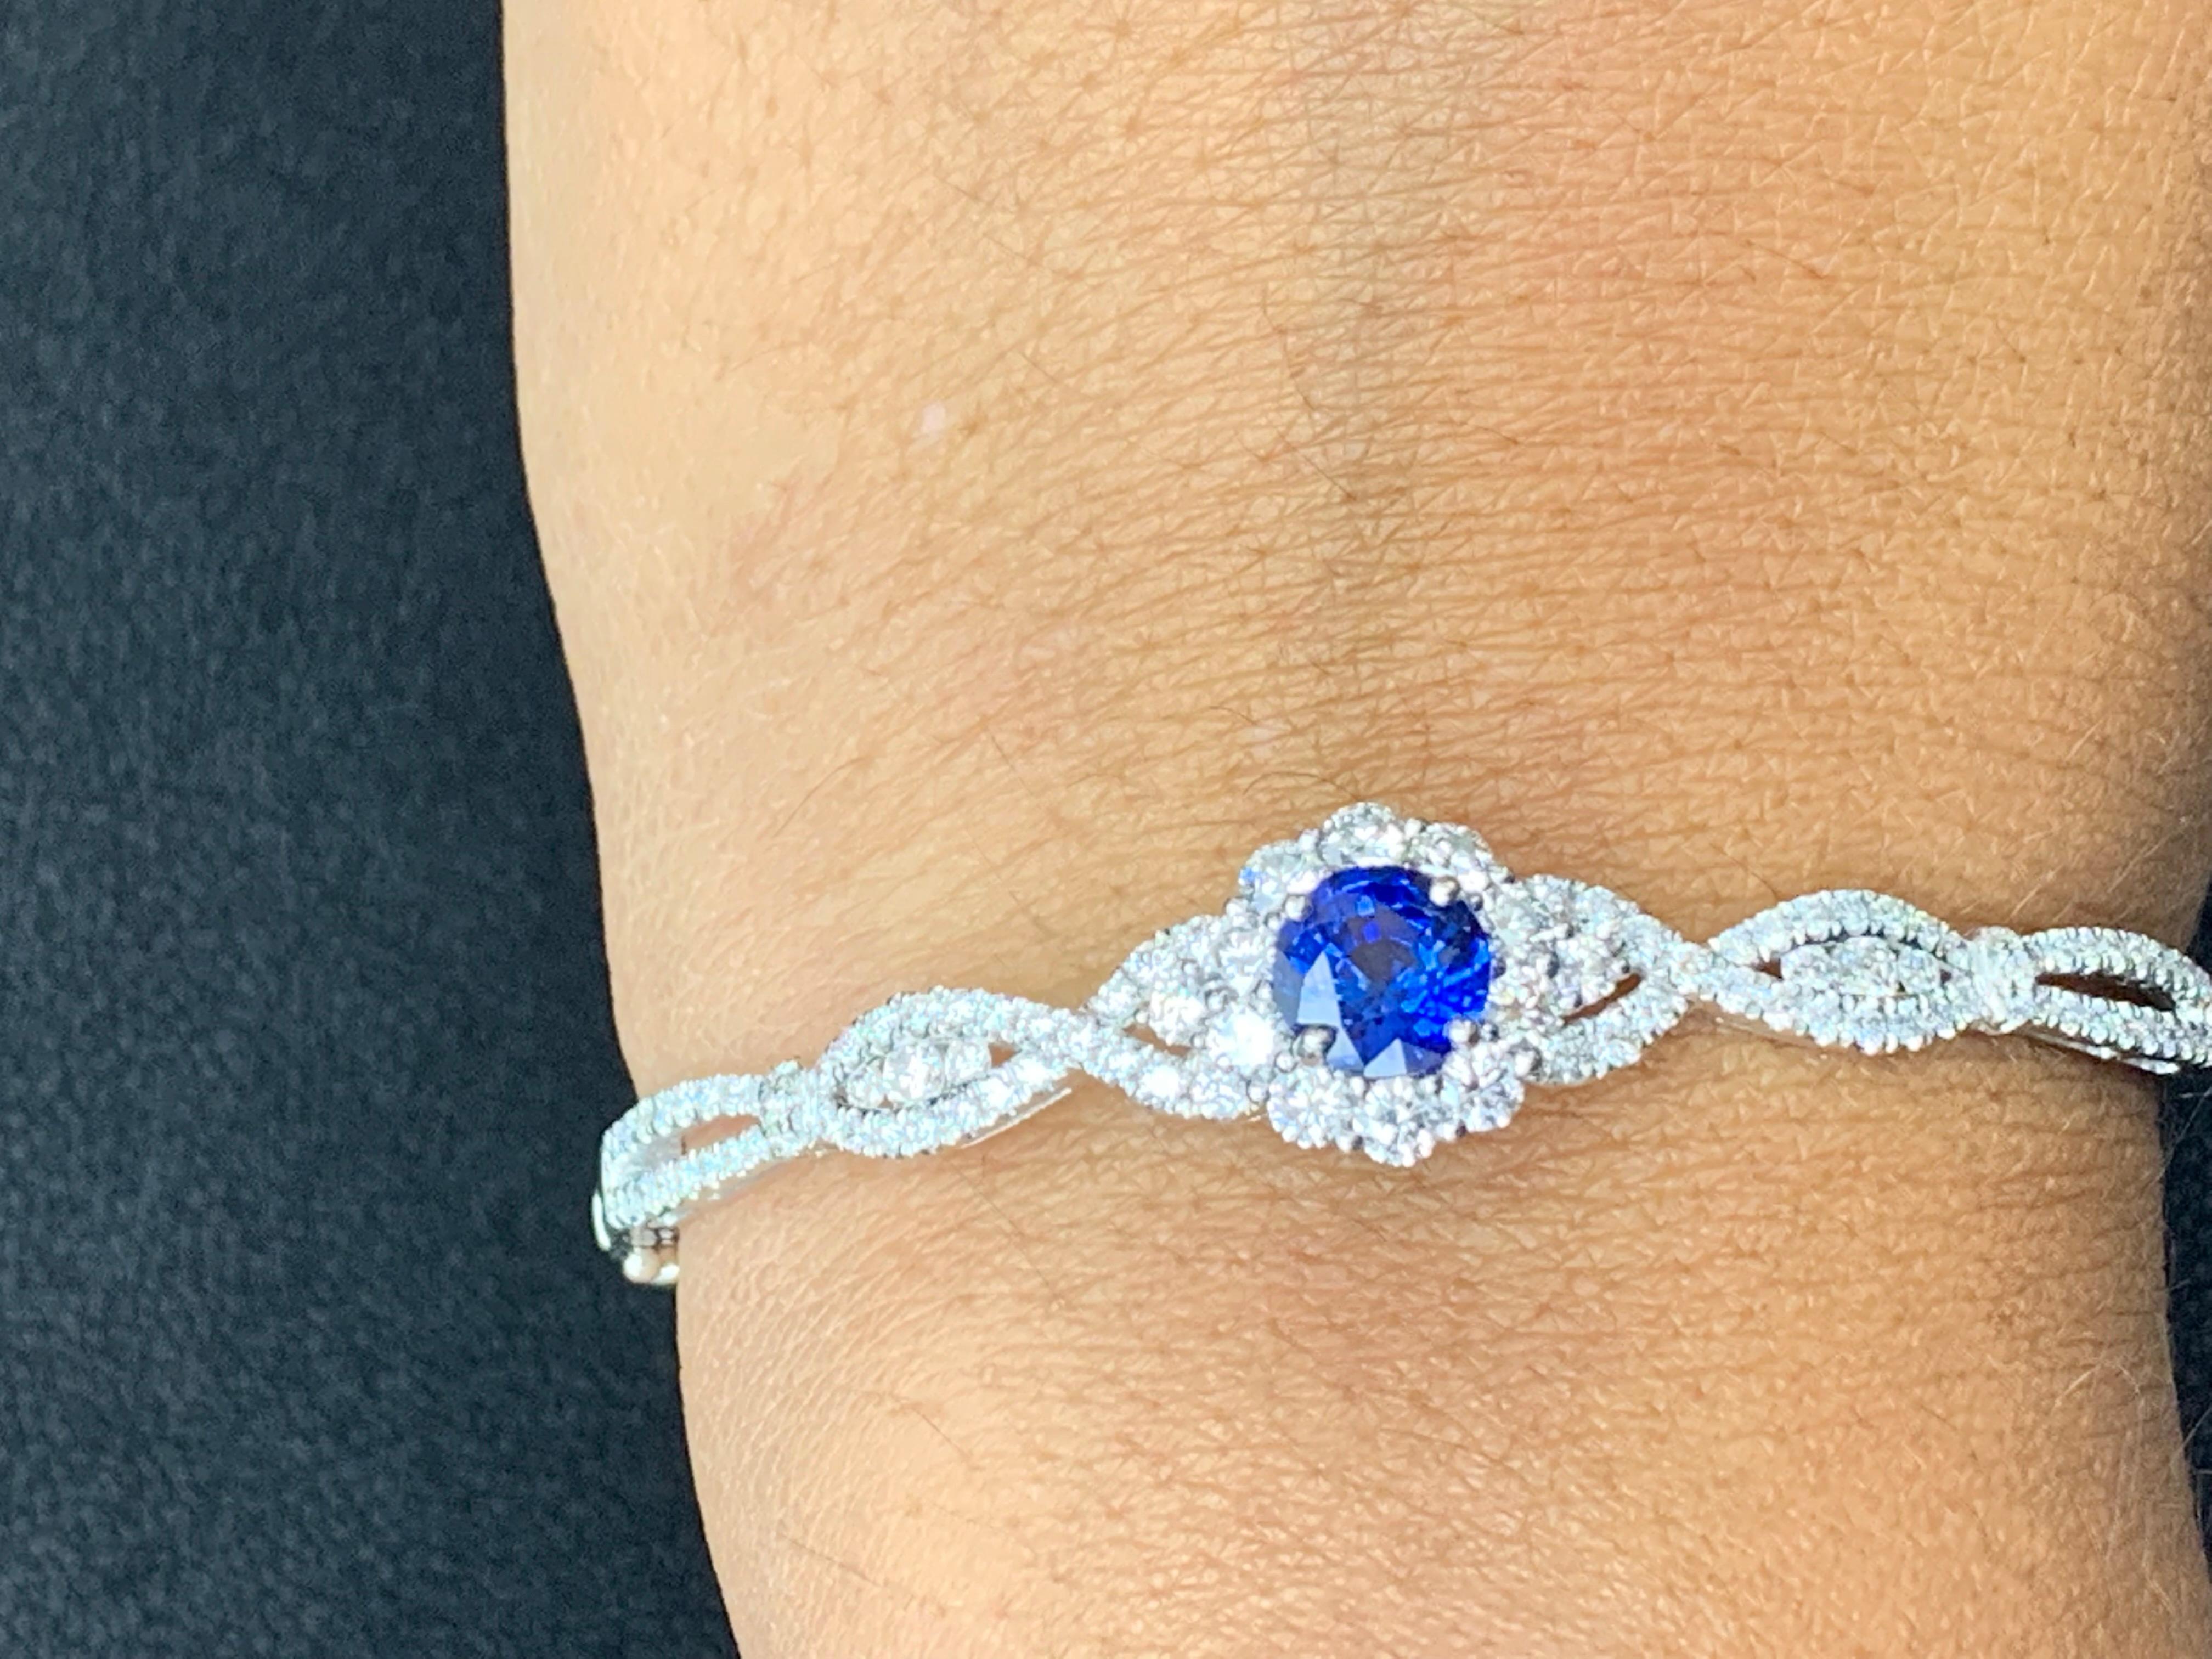 A unique and fashionable Sapphire bangle showcasing an openwork design set with 1.52 carat of Sapphire and 106 brilliant diamonds weighing 1.82 carat in total.  Made in 18k white gold.

Style available in different price ranges. Prices are based on